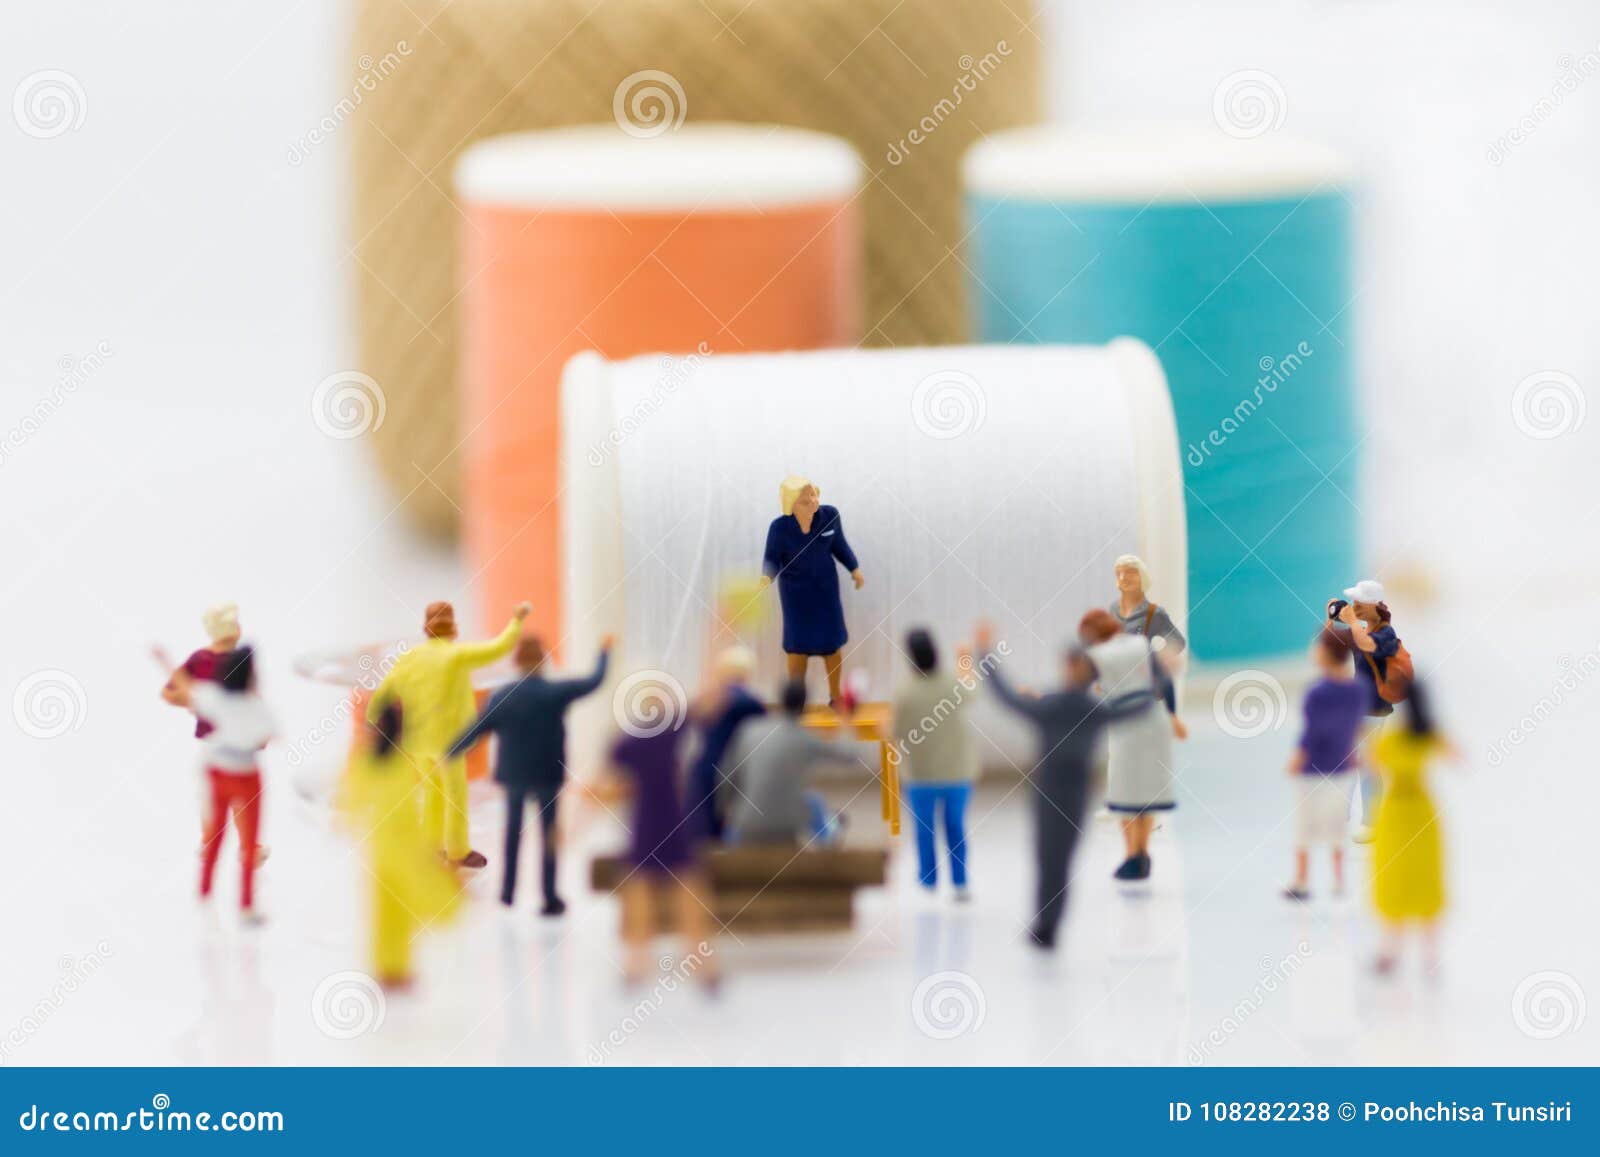 miniature people: group women weaving factory protest. image use for claims or benefits should be earned from hard work